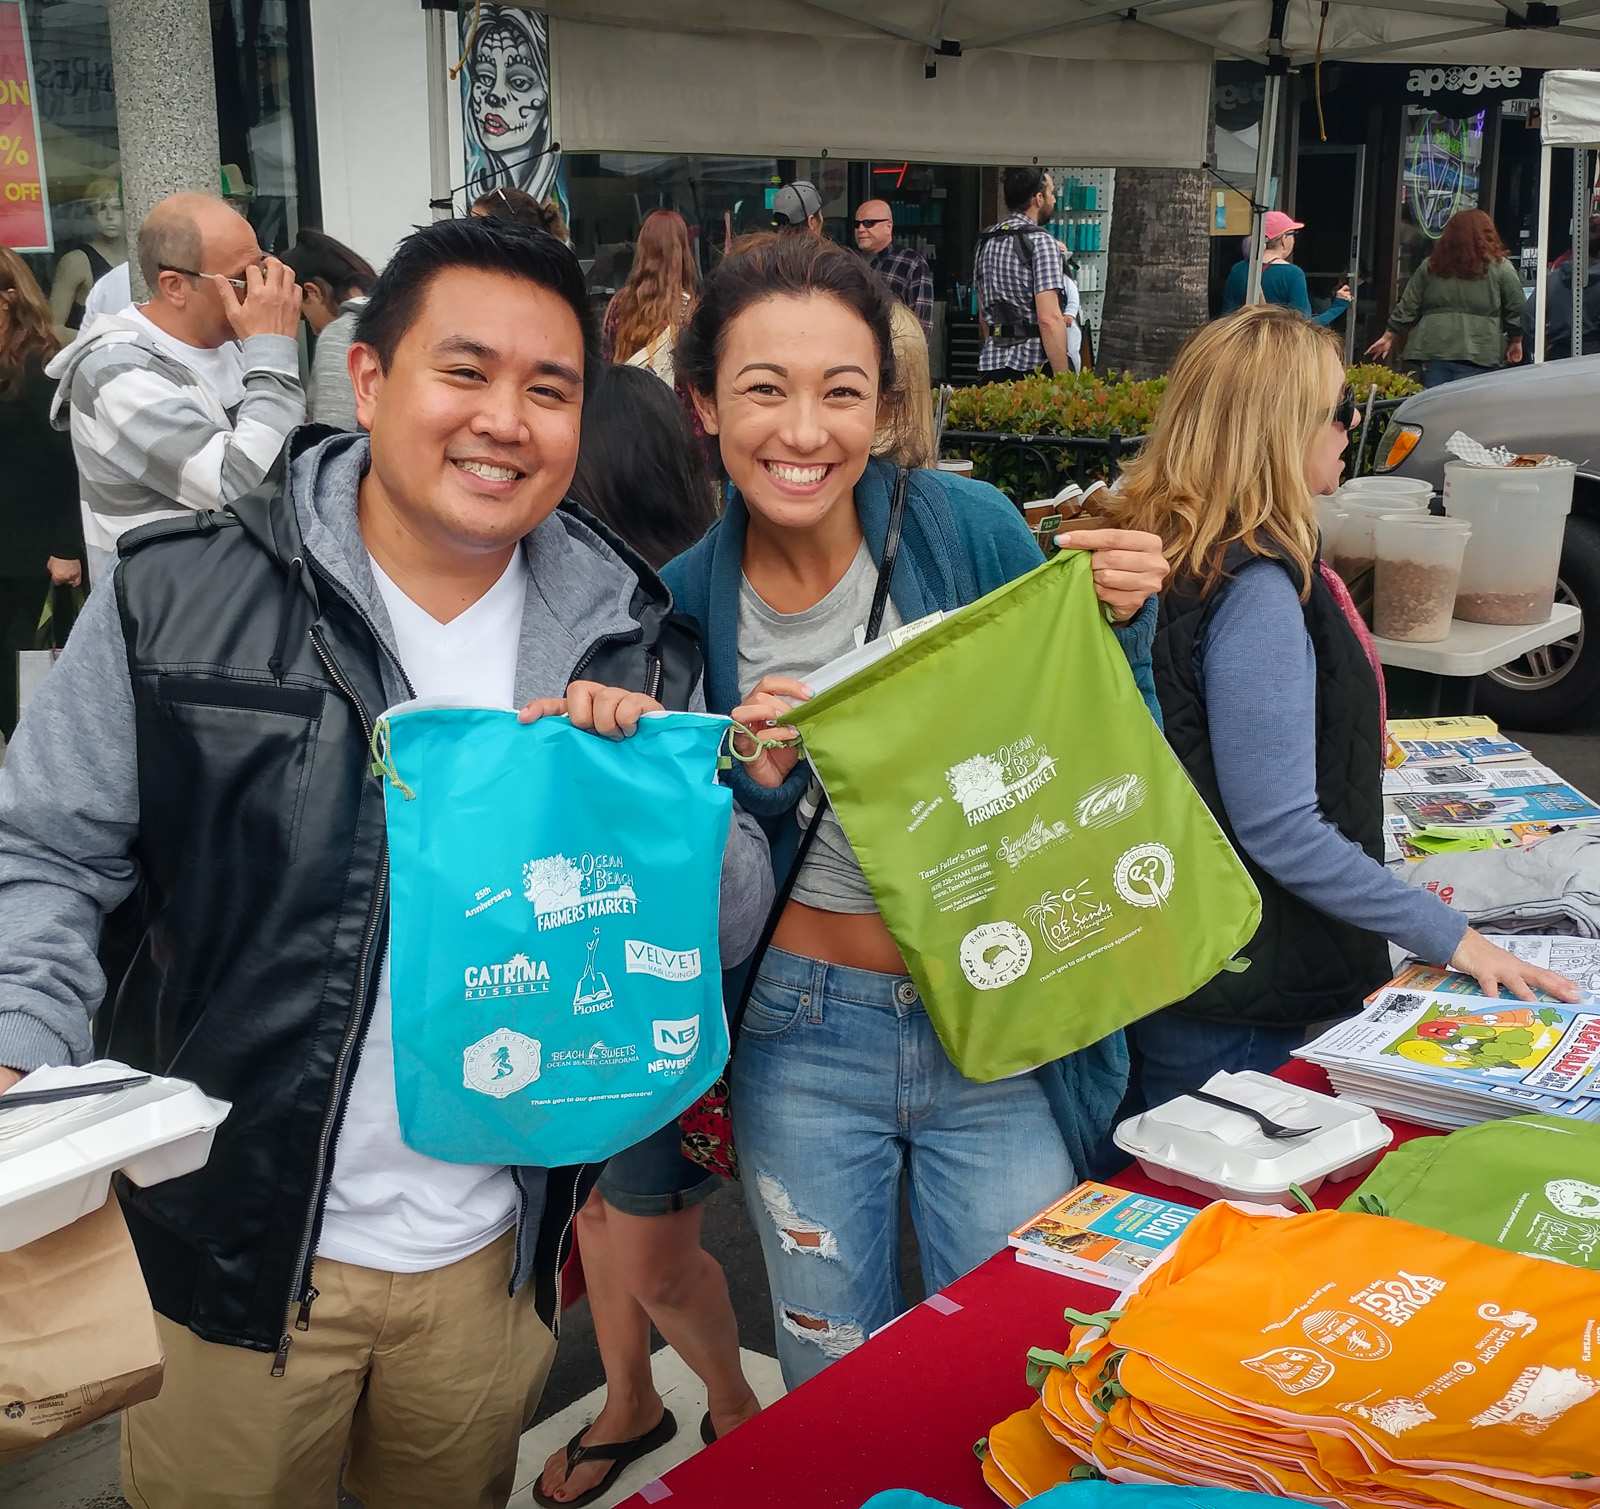 OBMA Reusable Bags for Farmers Market Shoppers